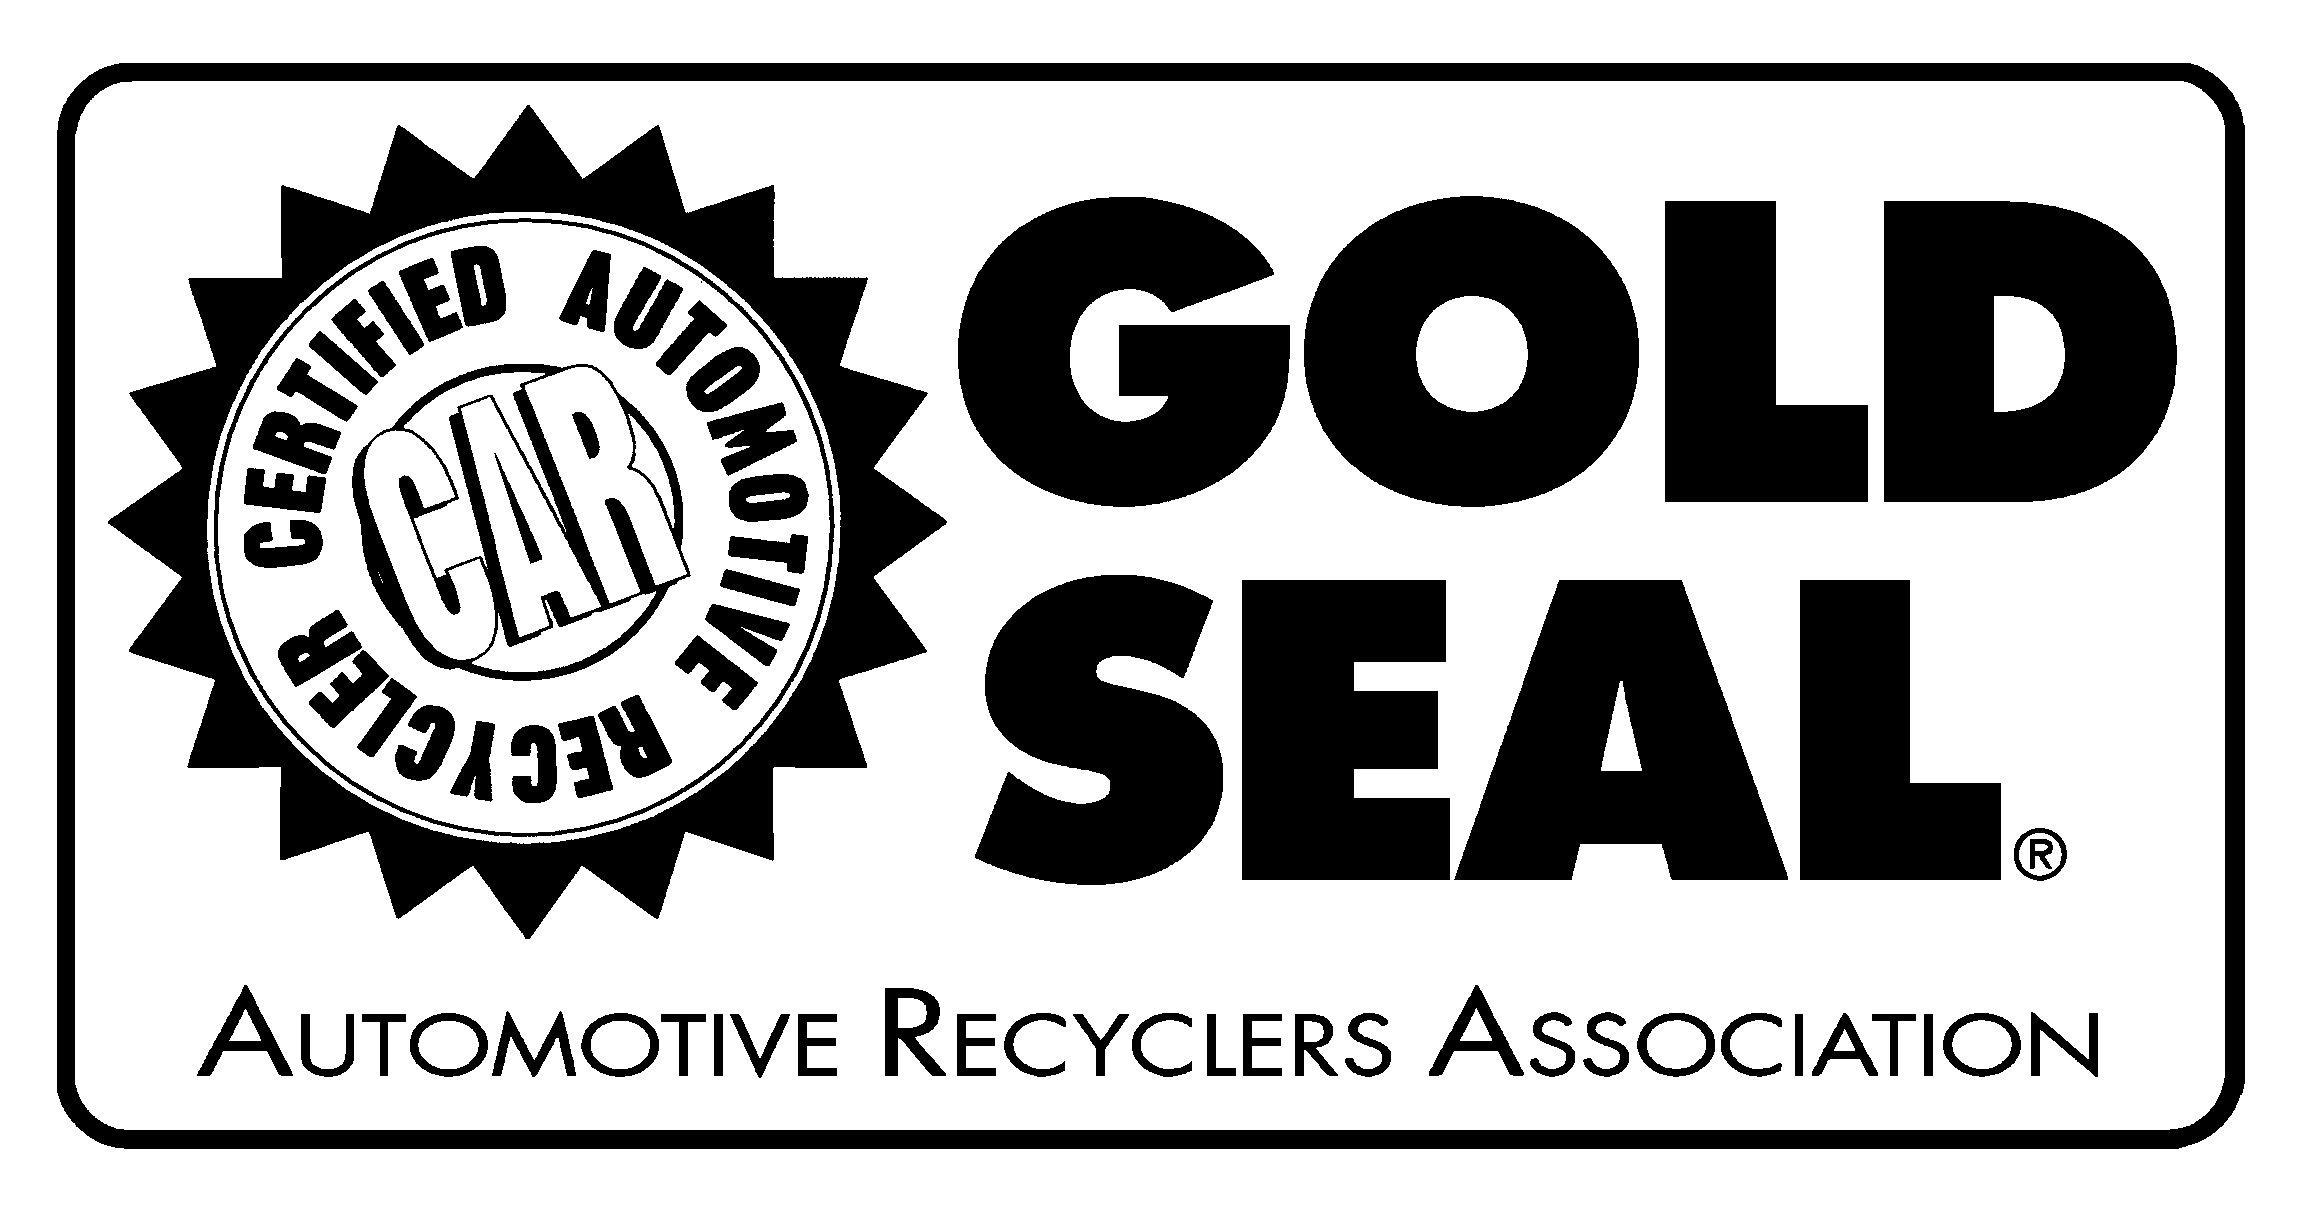 Automotive Recycling Logo - About Central Auto